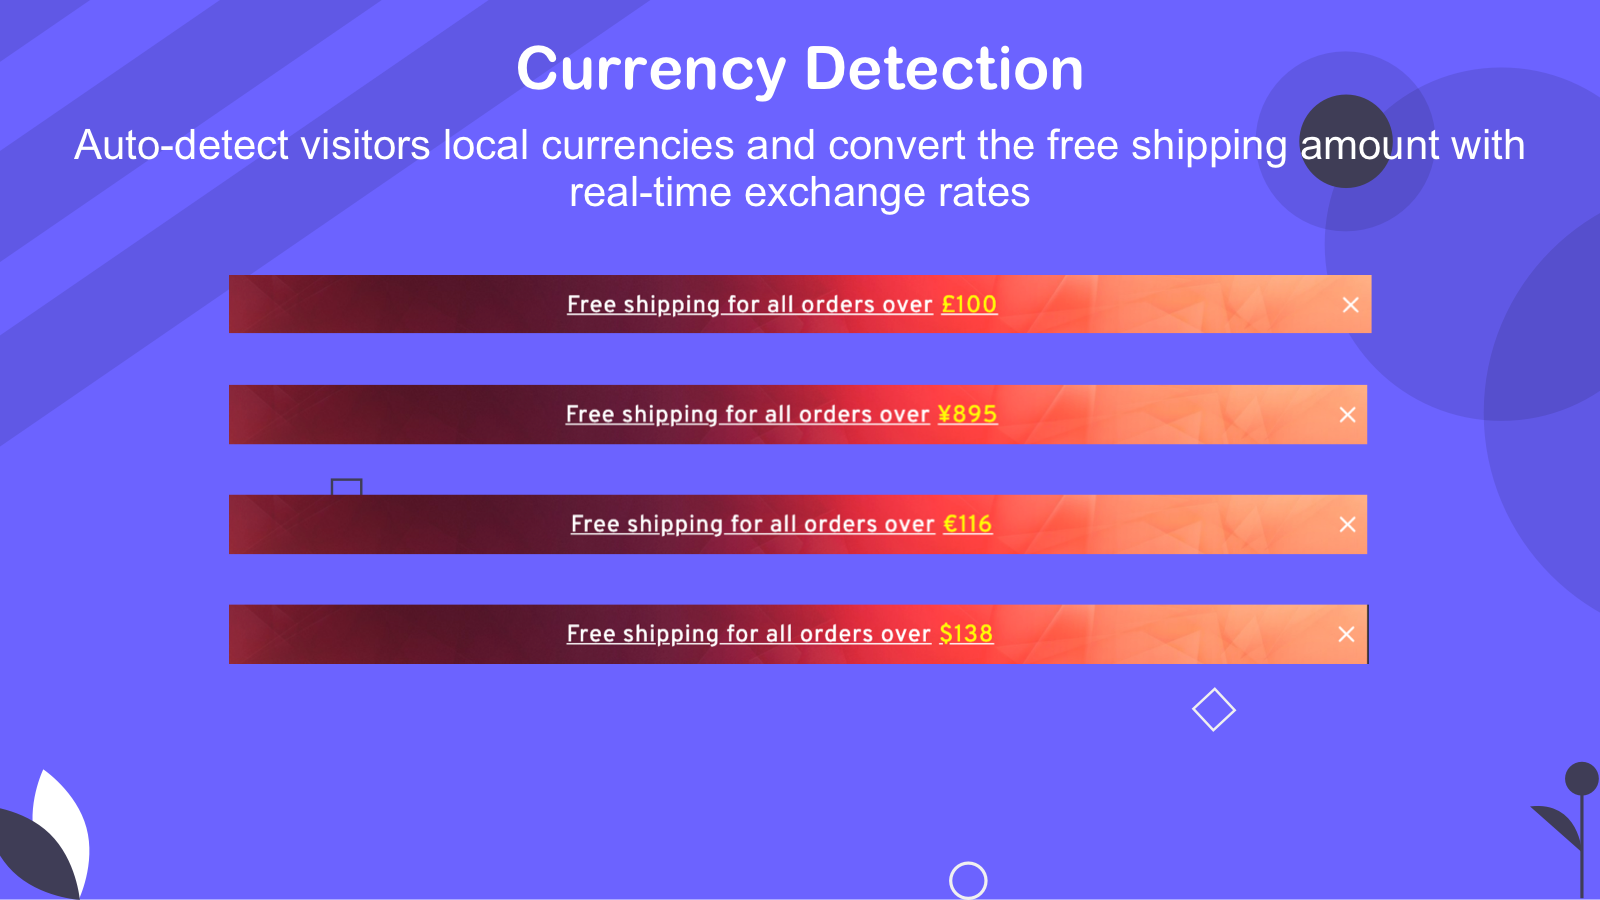 Currency Detection